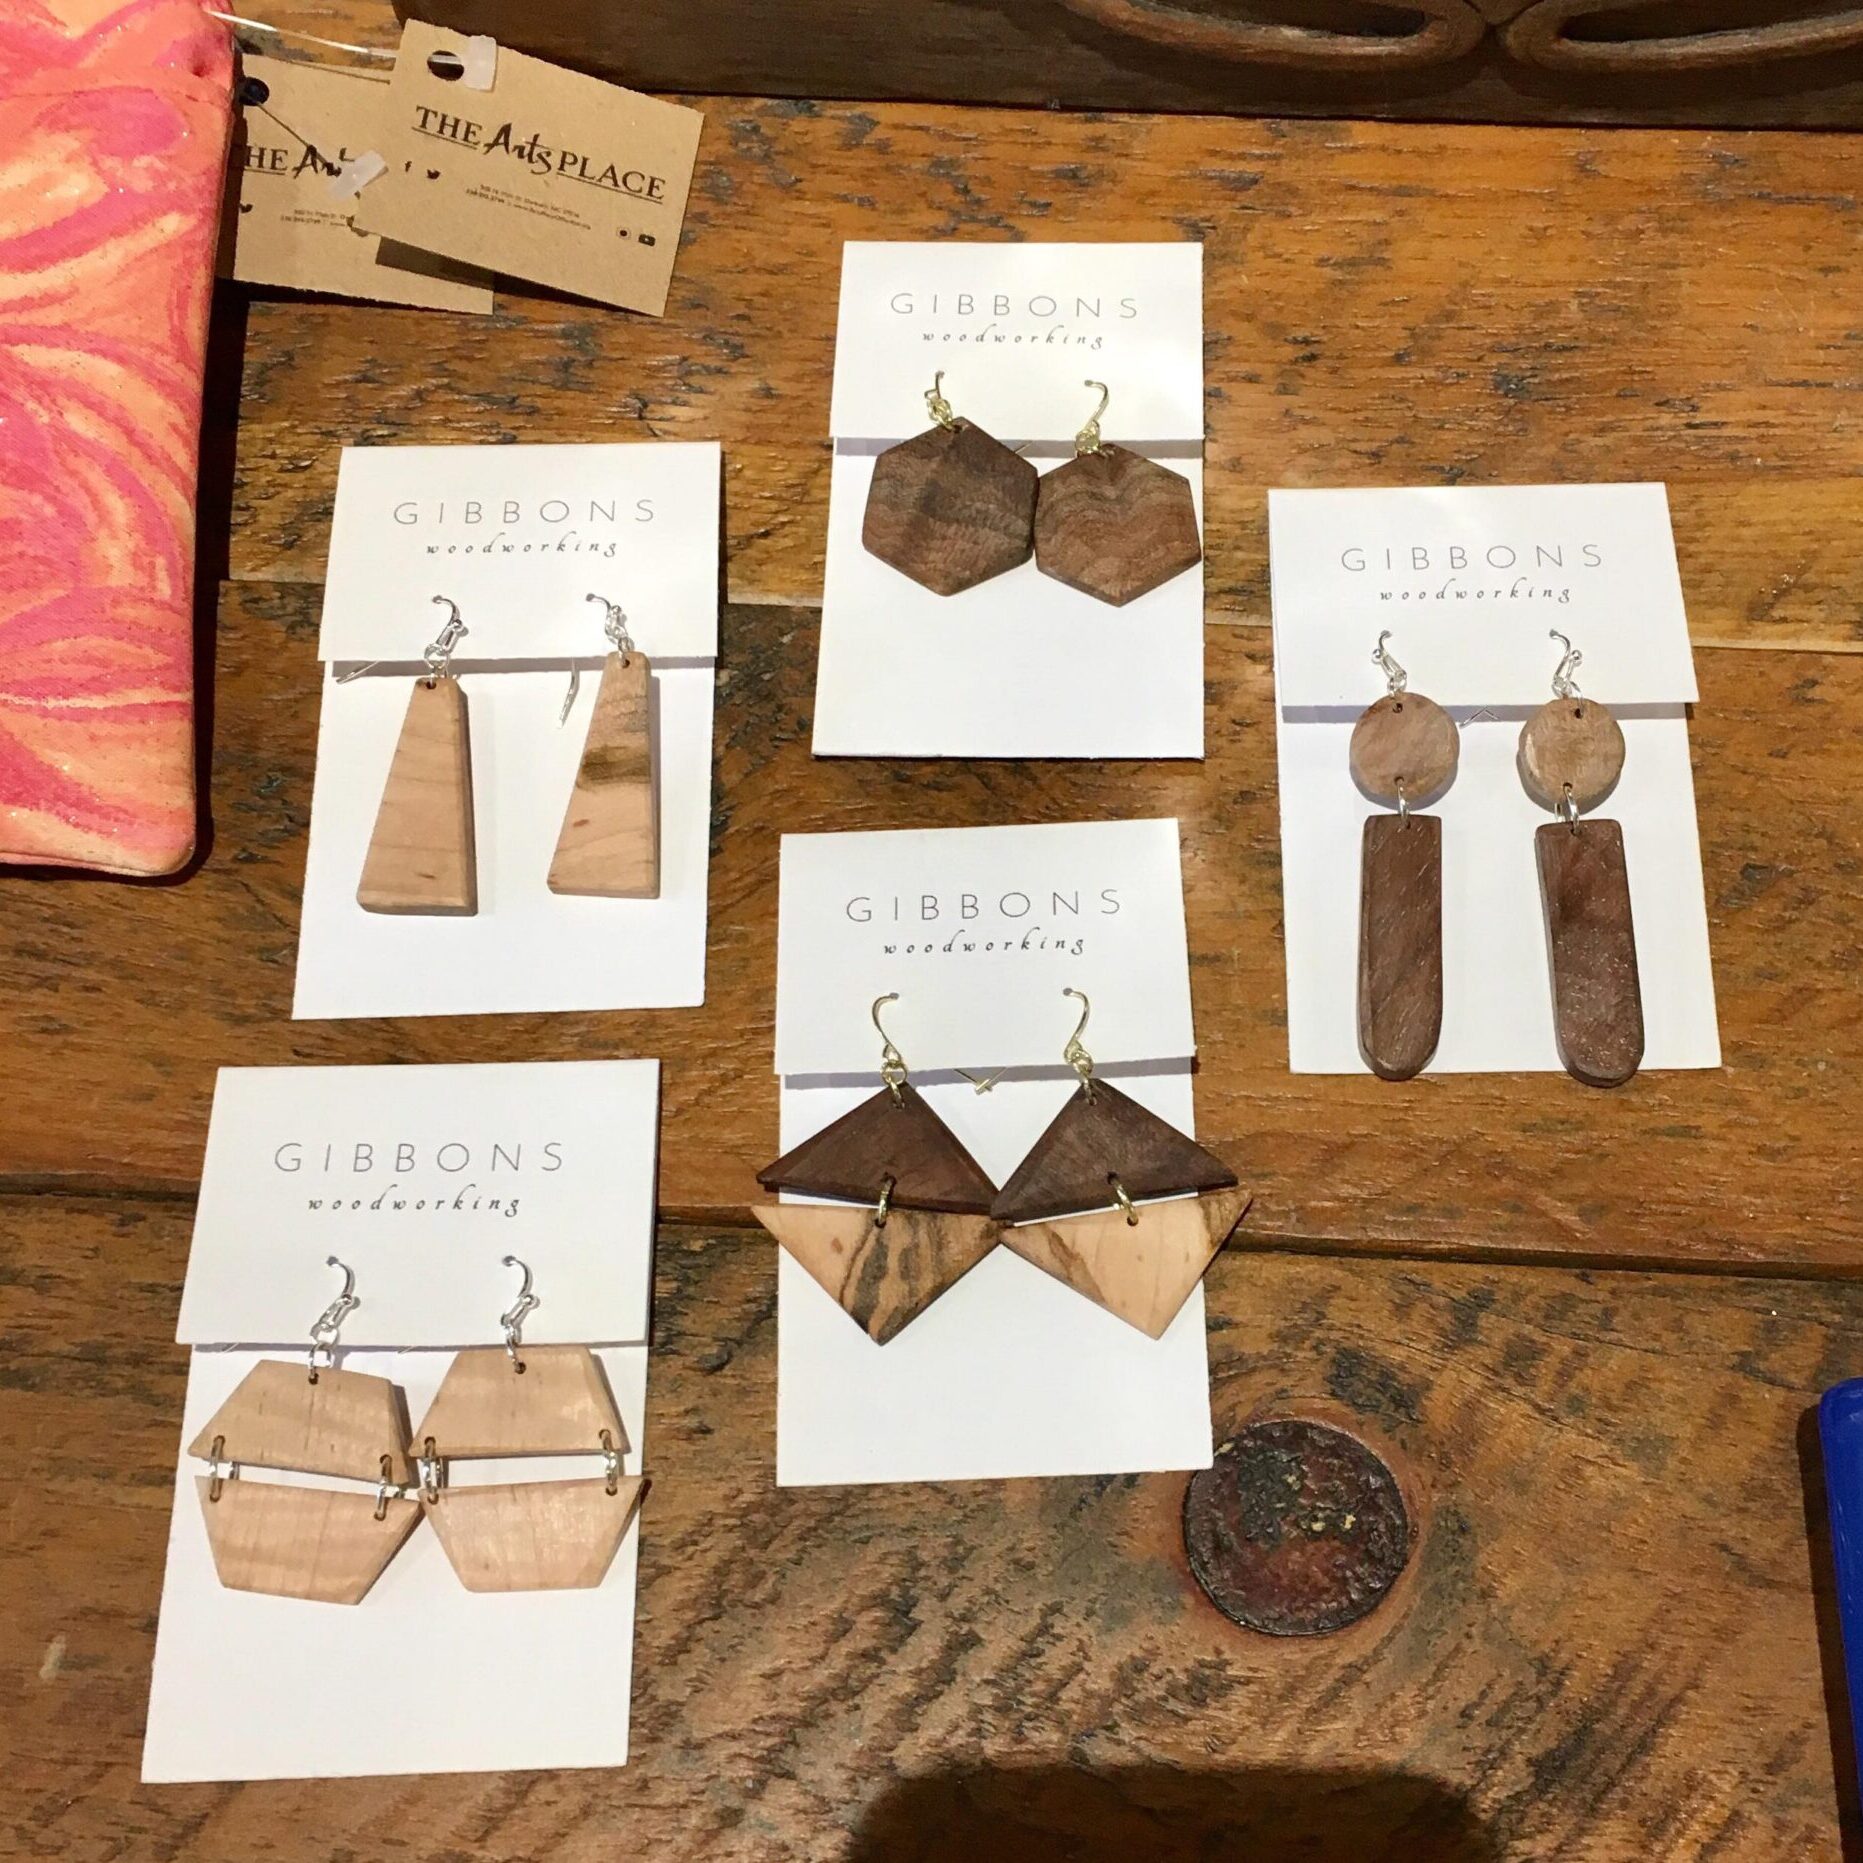 Sarah Gibbons: Jewelry/Woodworking